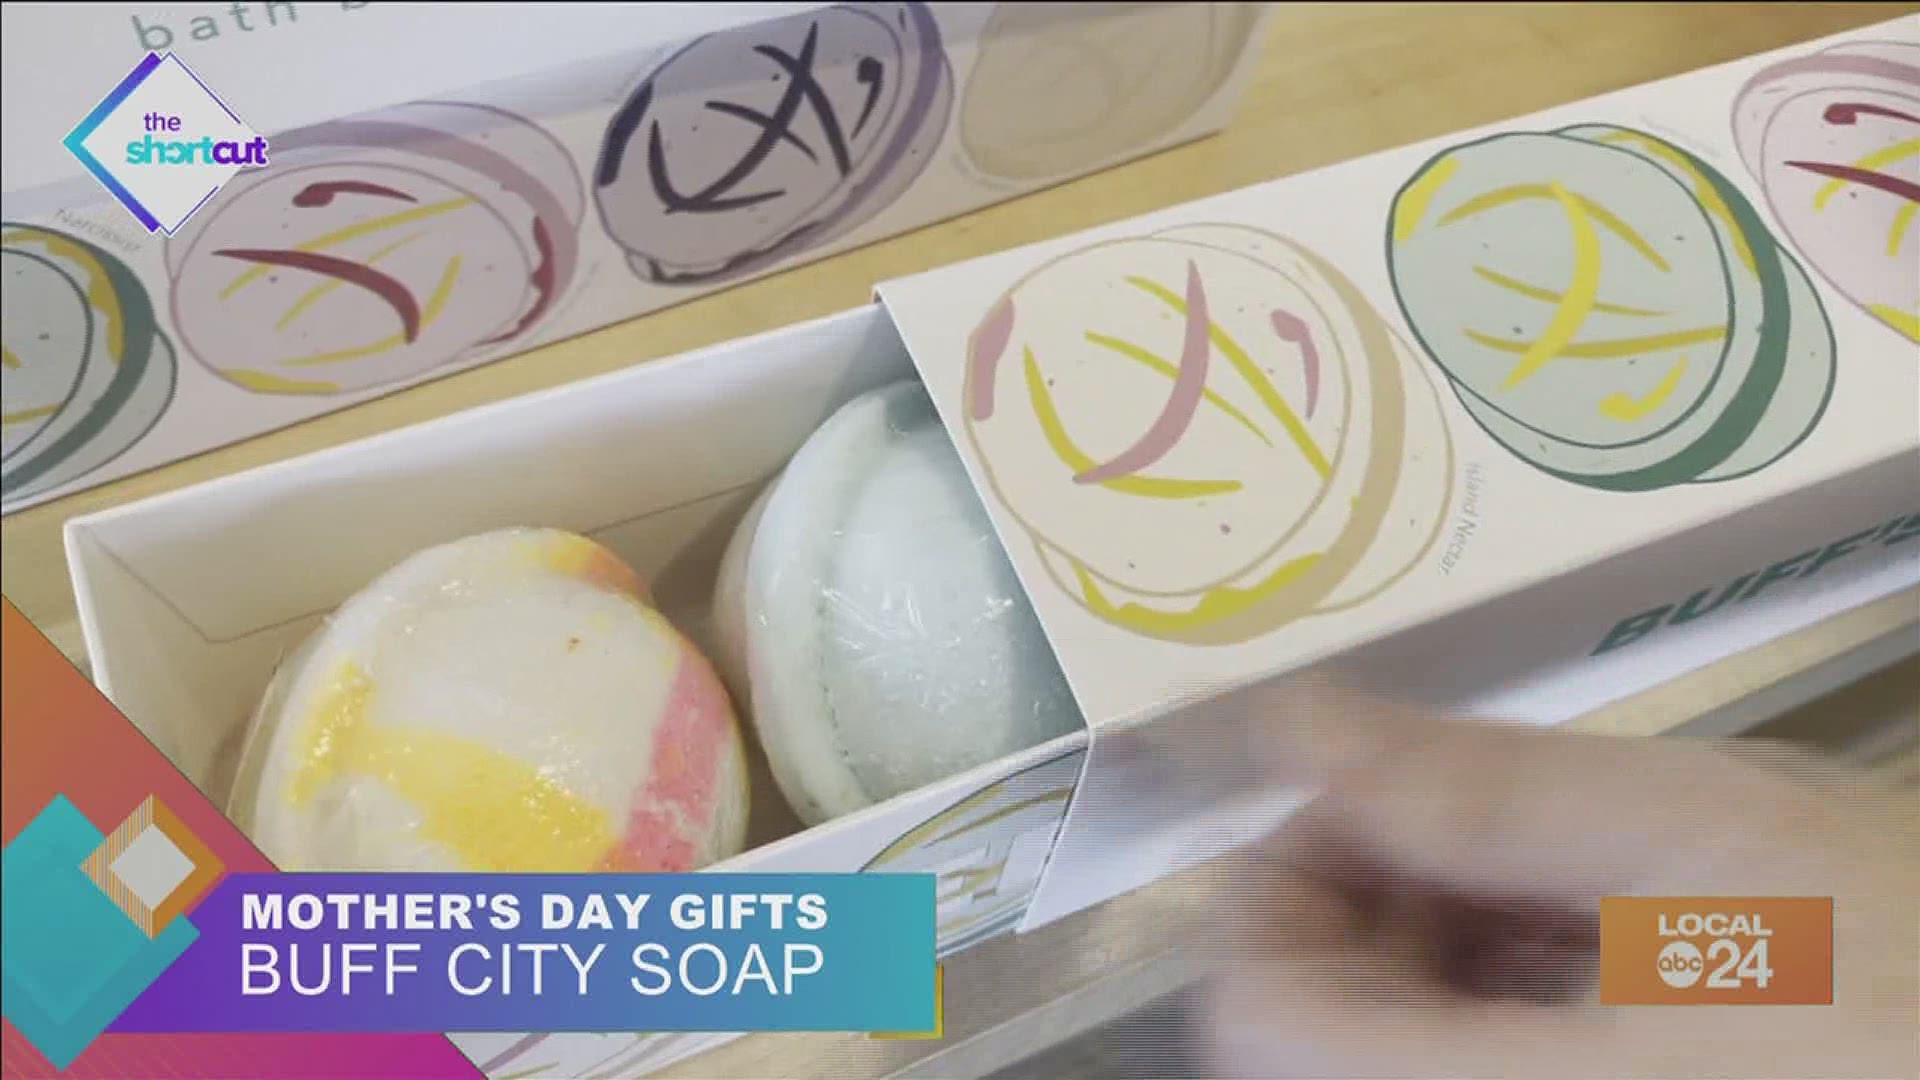 Still looking for that perfect gift for mom? Check out what Buff City Soap has to offer! They even offer a soap-making workshop for the DIY types!